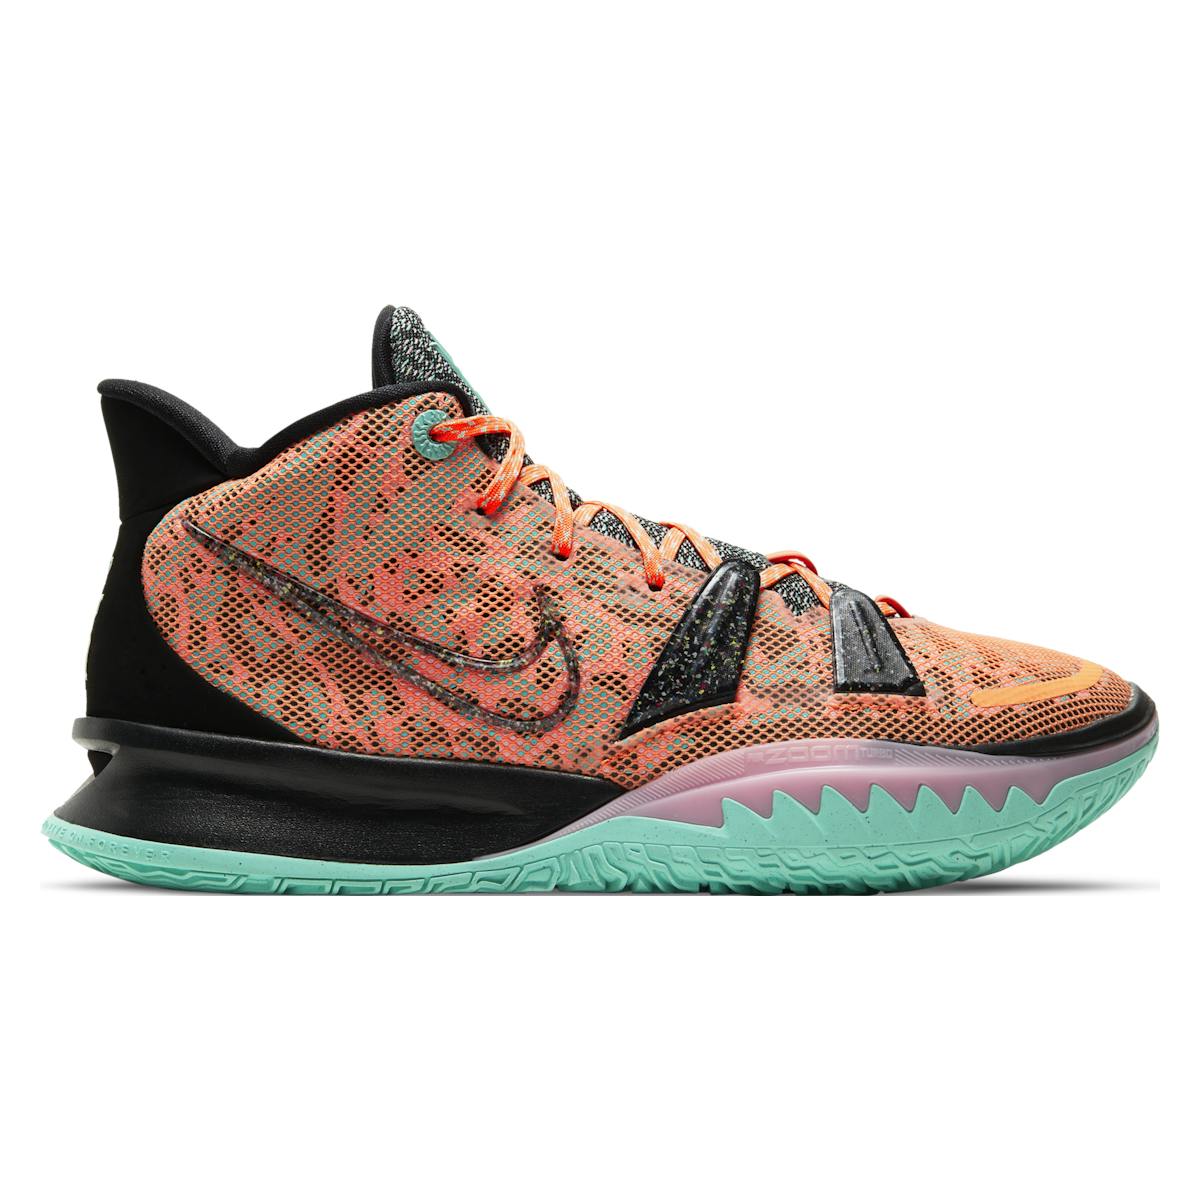 Nike Kyrie 7 EP "Play for the Future"